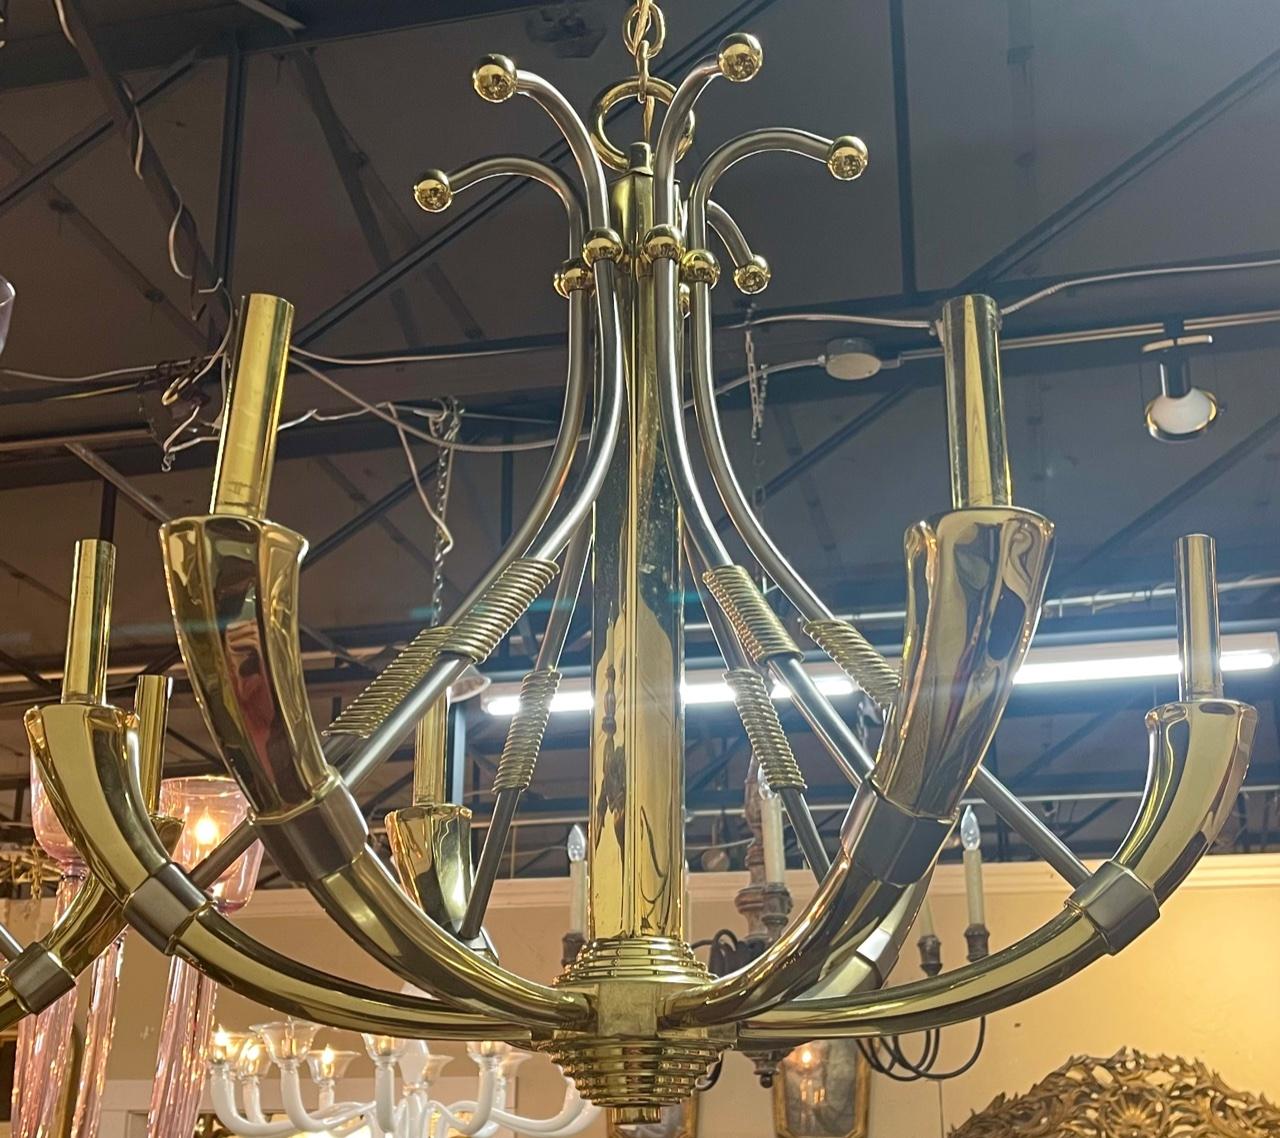 Pair of French mid-century Jansen steel and brass chandeliers. Circa 1960. Perfect for today's transitional designs! These chandeliers have been professionally re-wired, cleaned and is ready to hang. Includes matching chain and canopy.
   